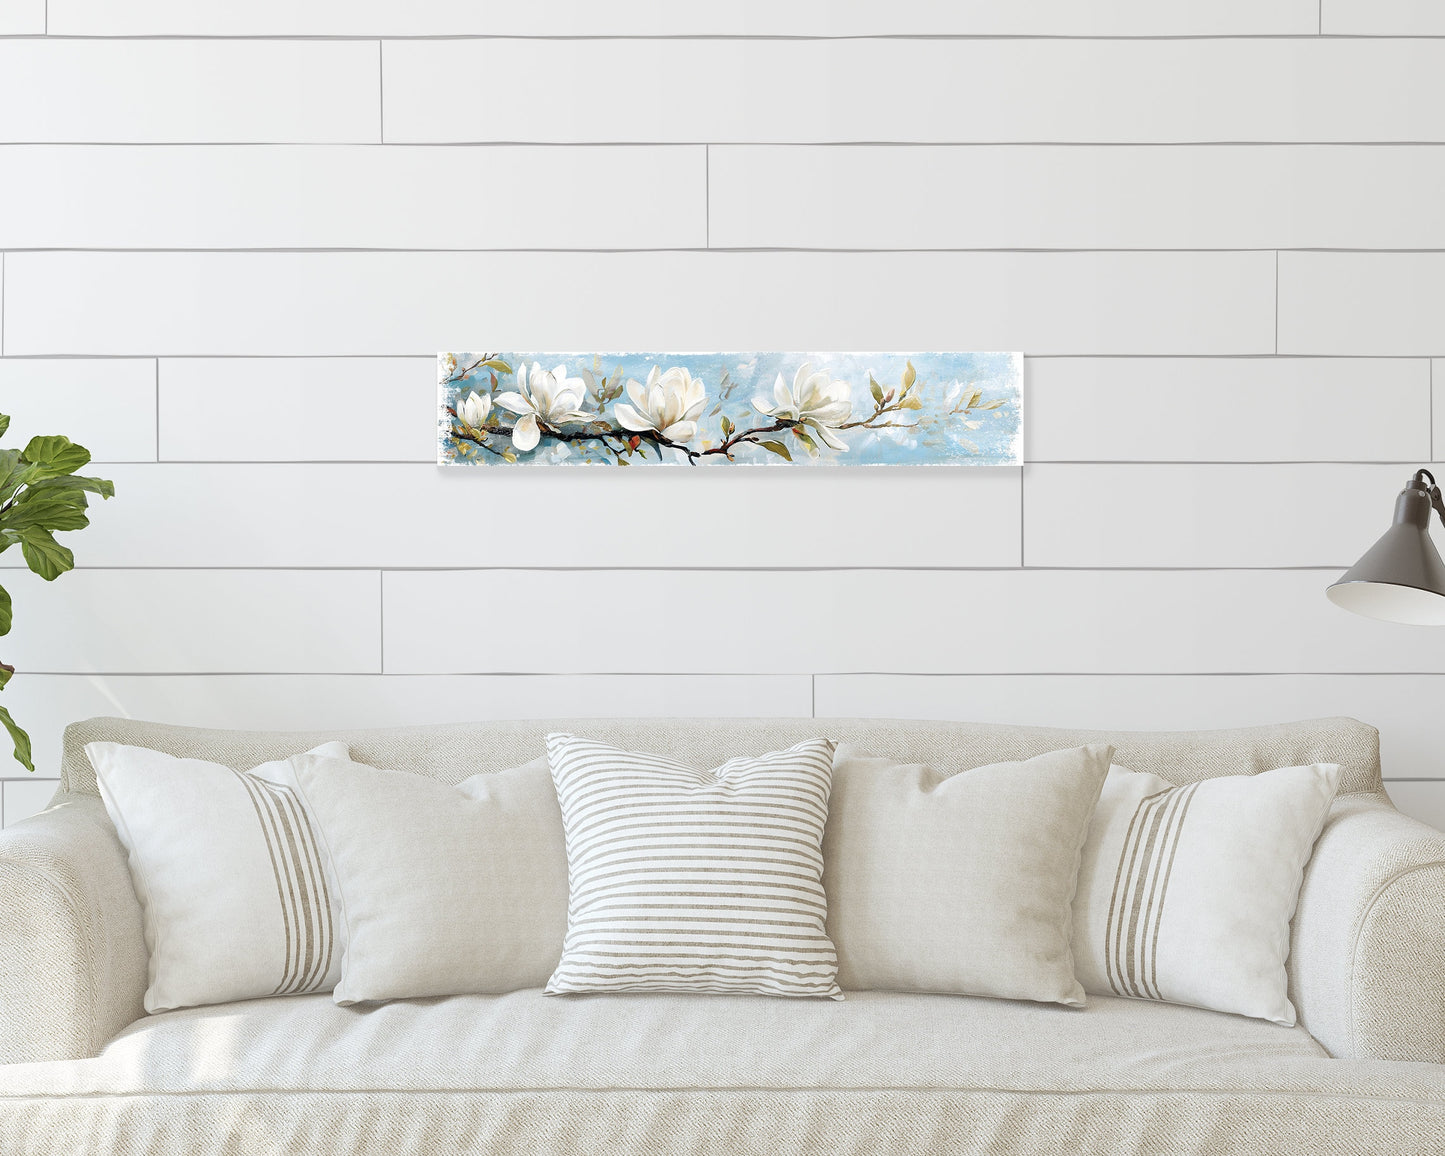 36in Spring Magnolia Wall Sign | Oil Paint Style White Magnolia | Light Blue Background | Perfect for Entryway, Front Door, Porch Home Decor